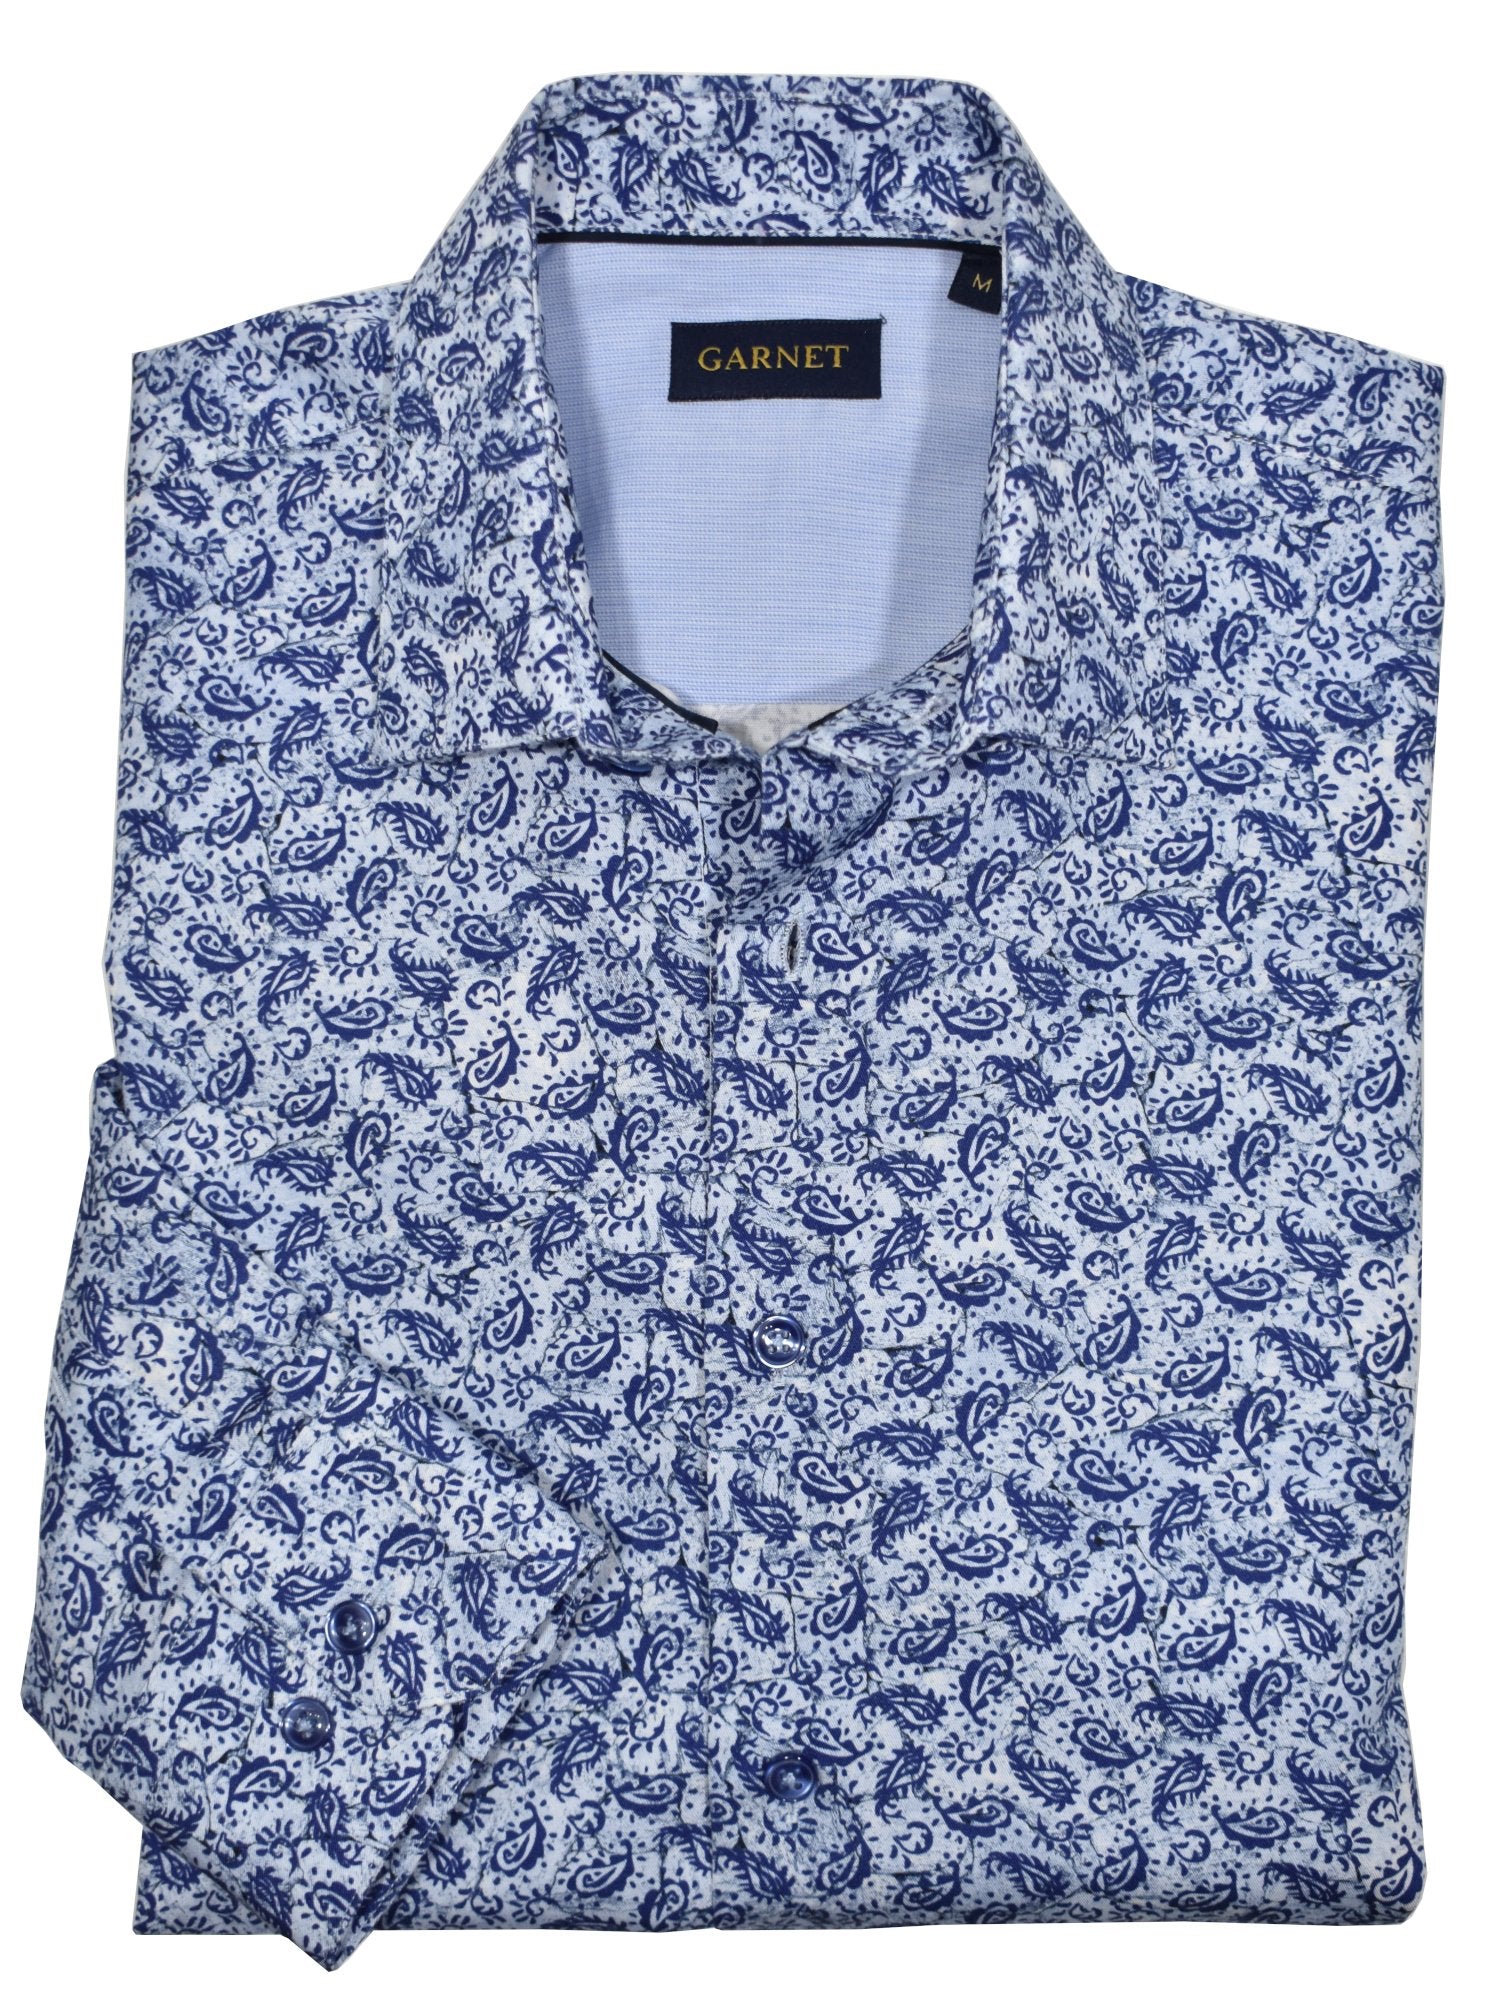 Be the envy of your friends with the Fightin' Paisley sport shirt. Its navy paisleys add a hip vibe to the ultra-soft cotton fabric, and its medium collar and classic shaped fit ensure you look your best! Add this shirt to your wardrobe and become the star of any event. The rich navy colors are perfect to pair with your favorite denims.  Classic shaped fit.